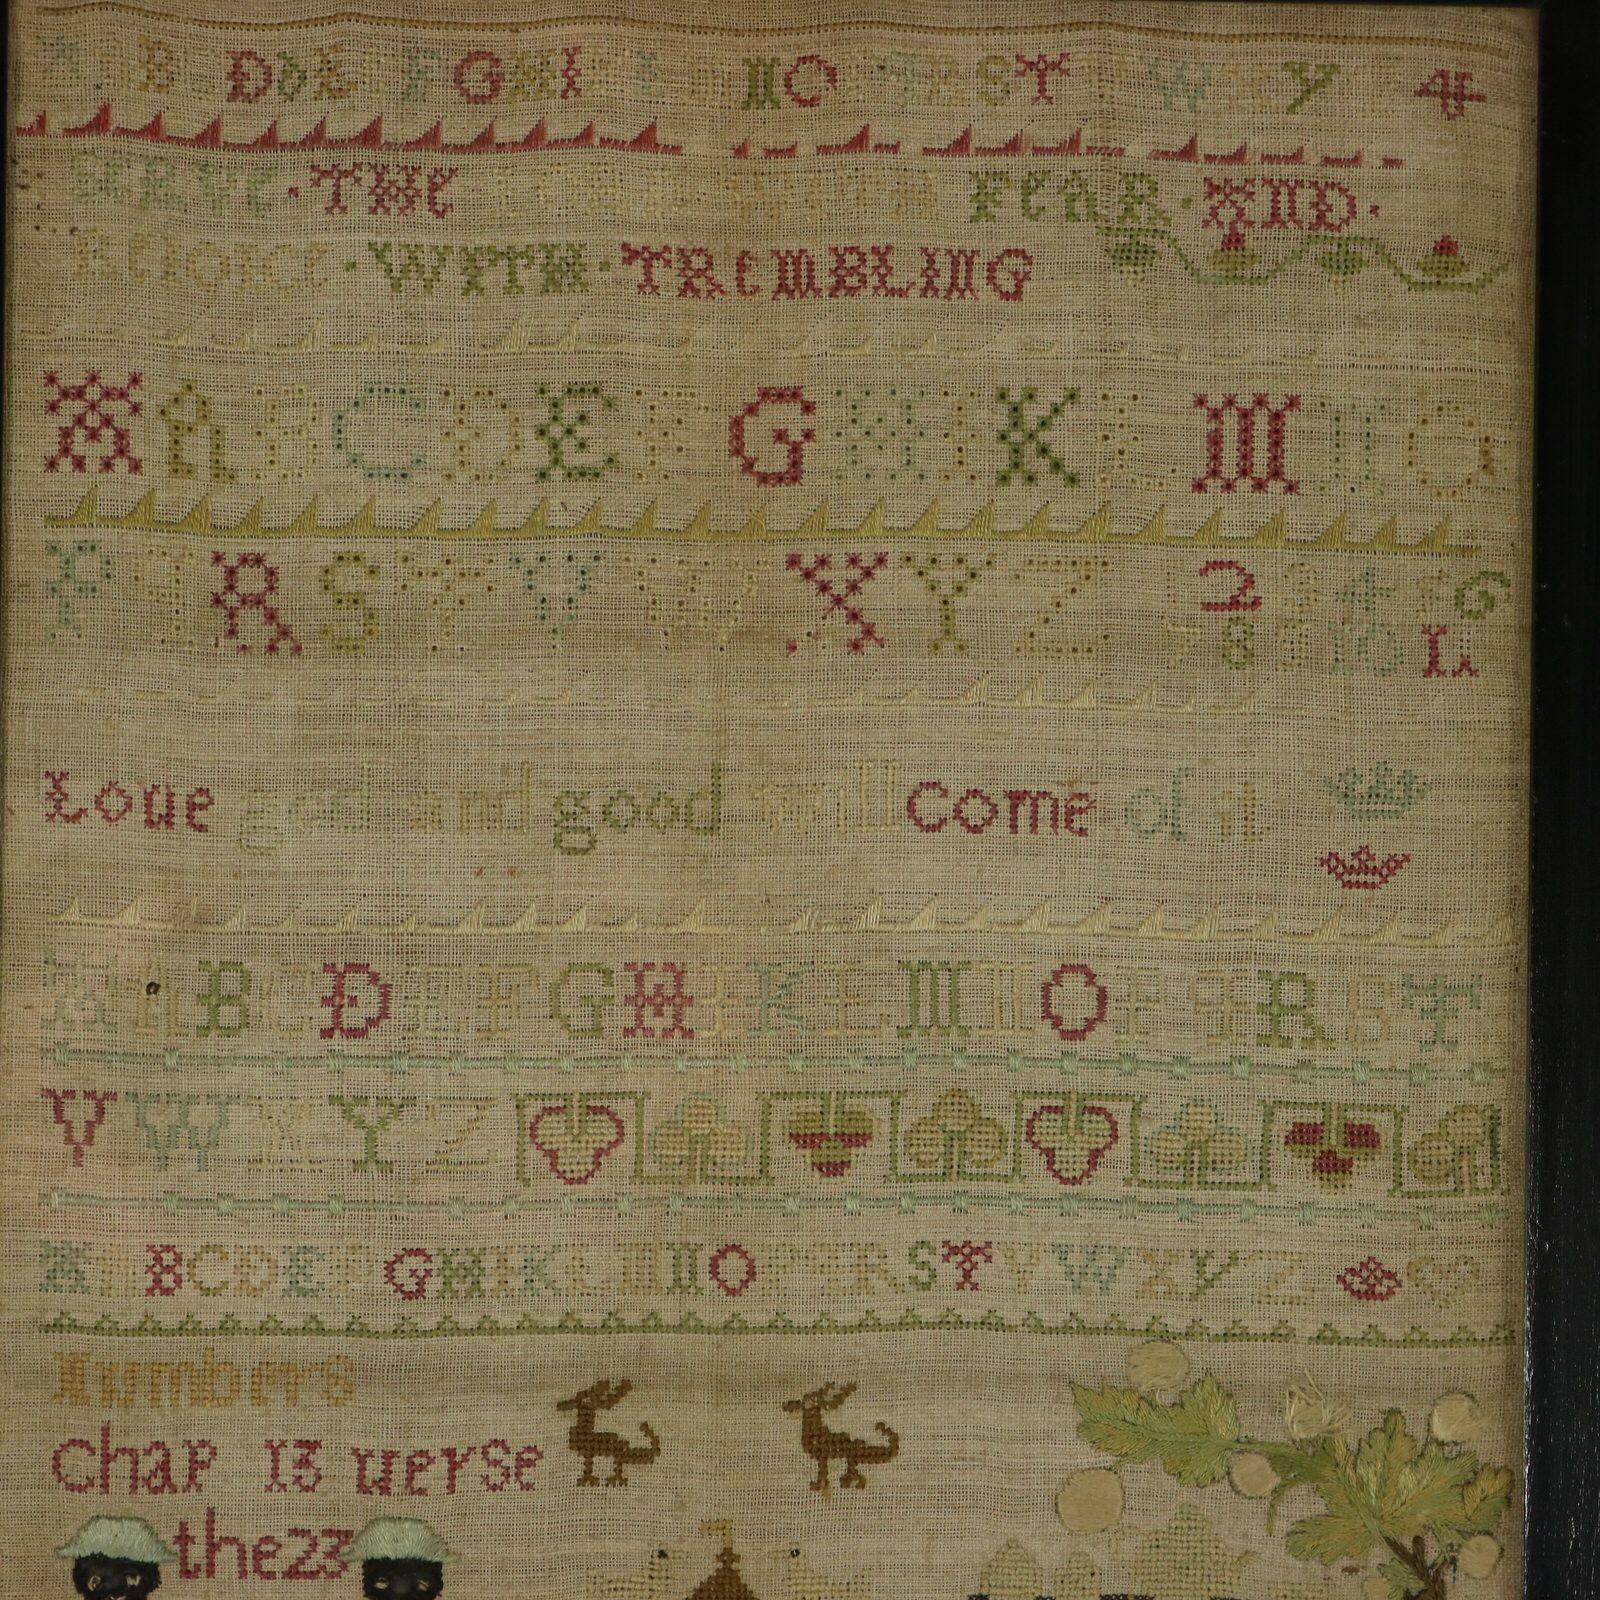 Queen Anne Band Sampler, 1713, by Ann Arner. The sampler is worked in silk on a linen ground, in a variety of stitches. Divider lines in various patterns. Colours black, red, pale green, dark brown, copper, pink, pale blue and silver. Multiple